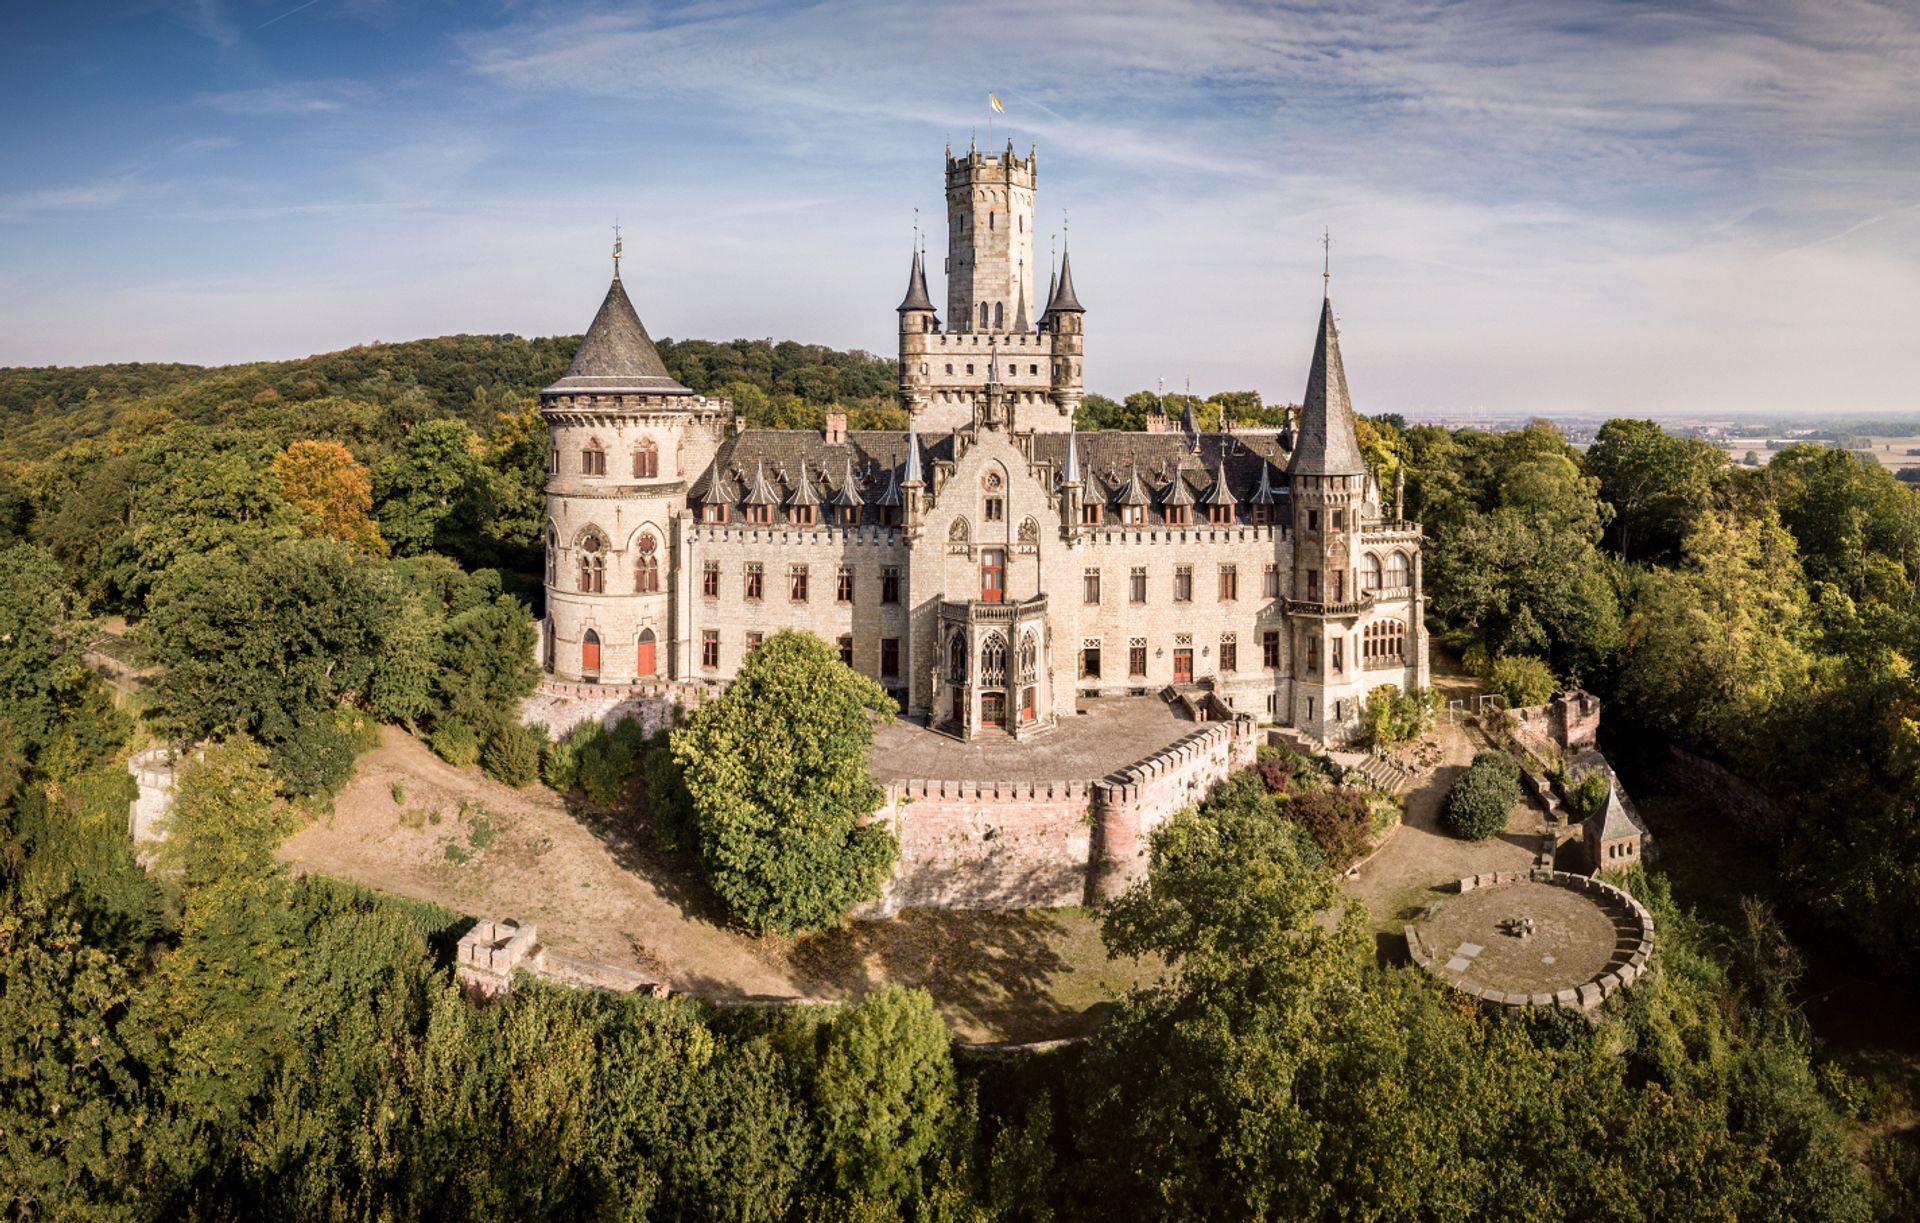 Marienburg Castle in Lower Saxony is at the centre of a legal dispute between the Prince of Hanover and his son 